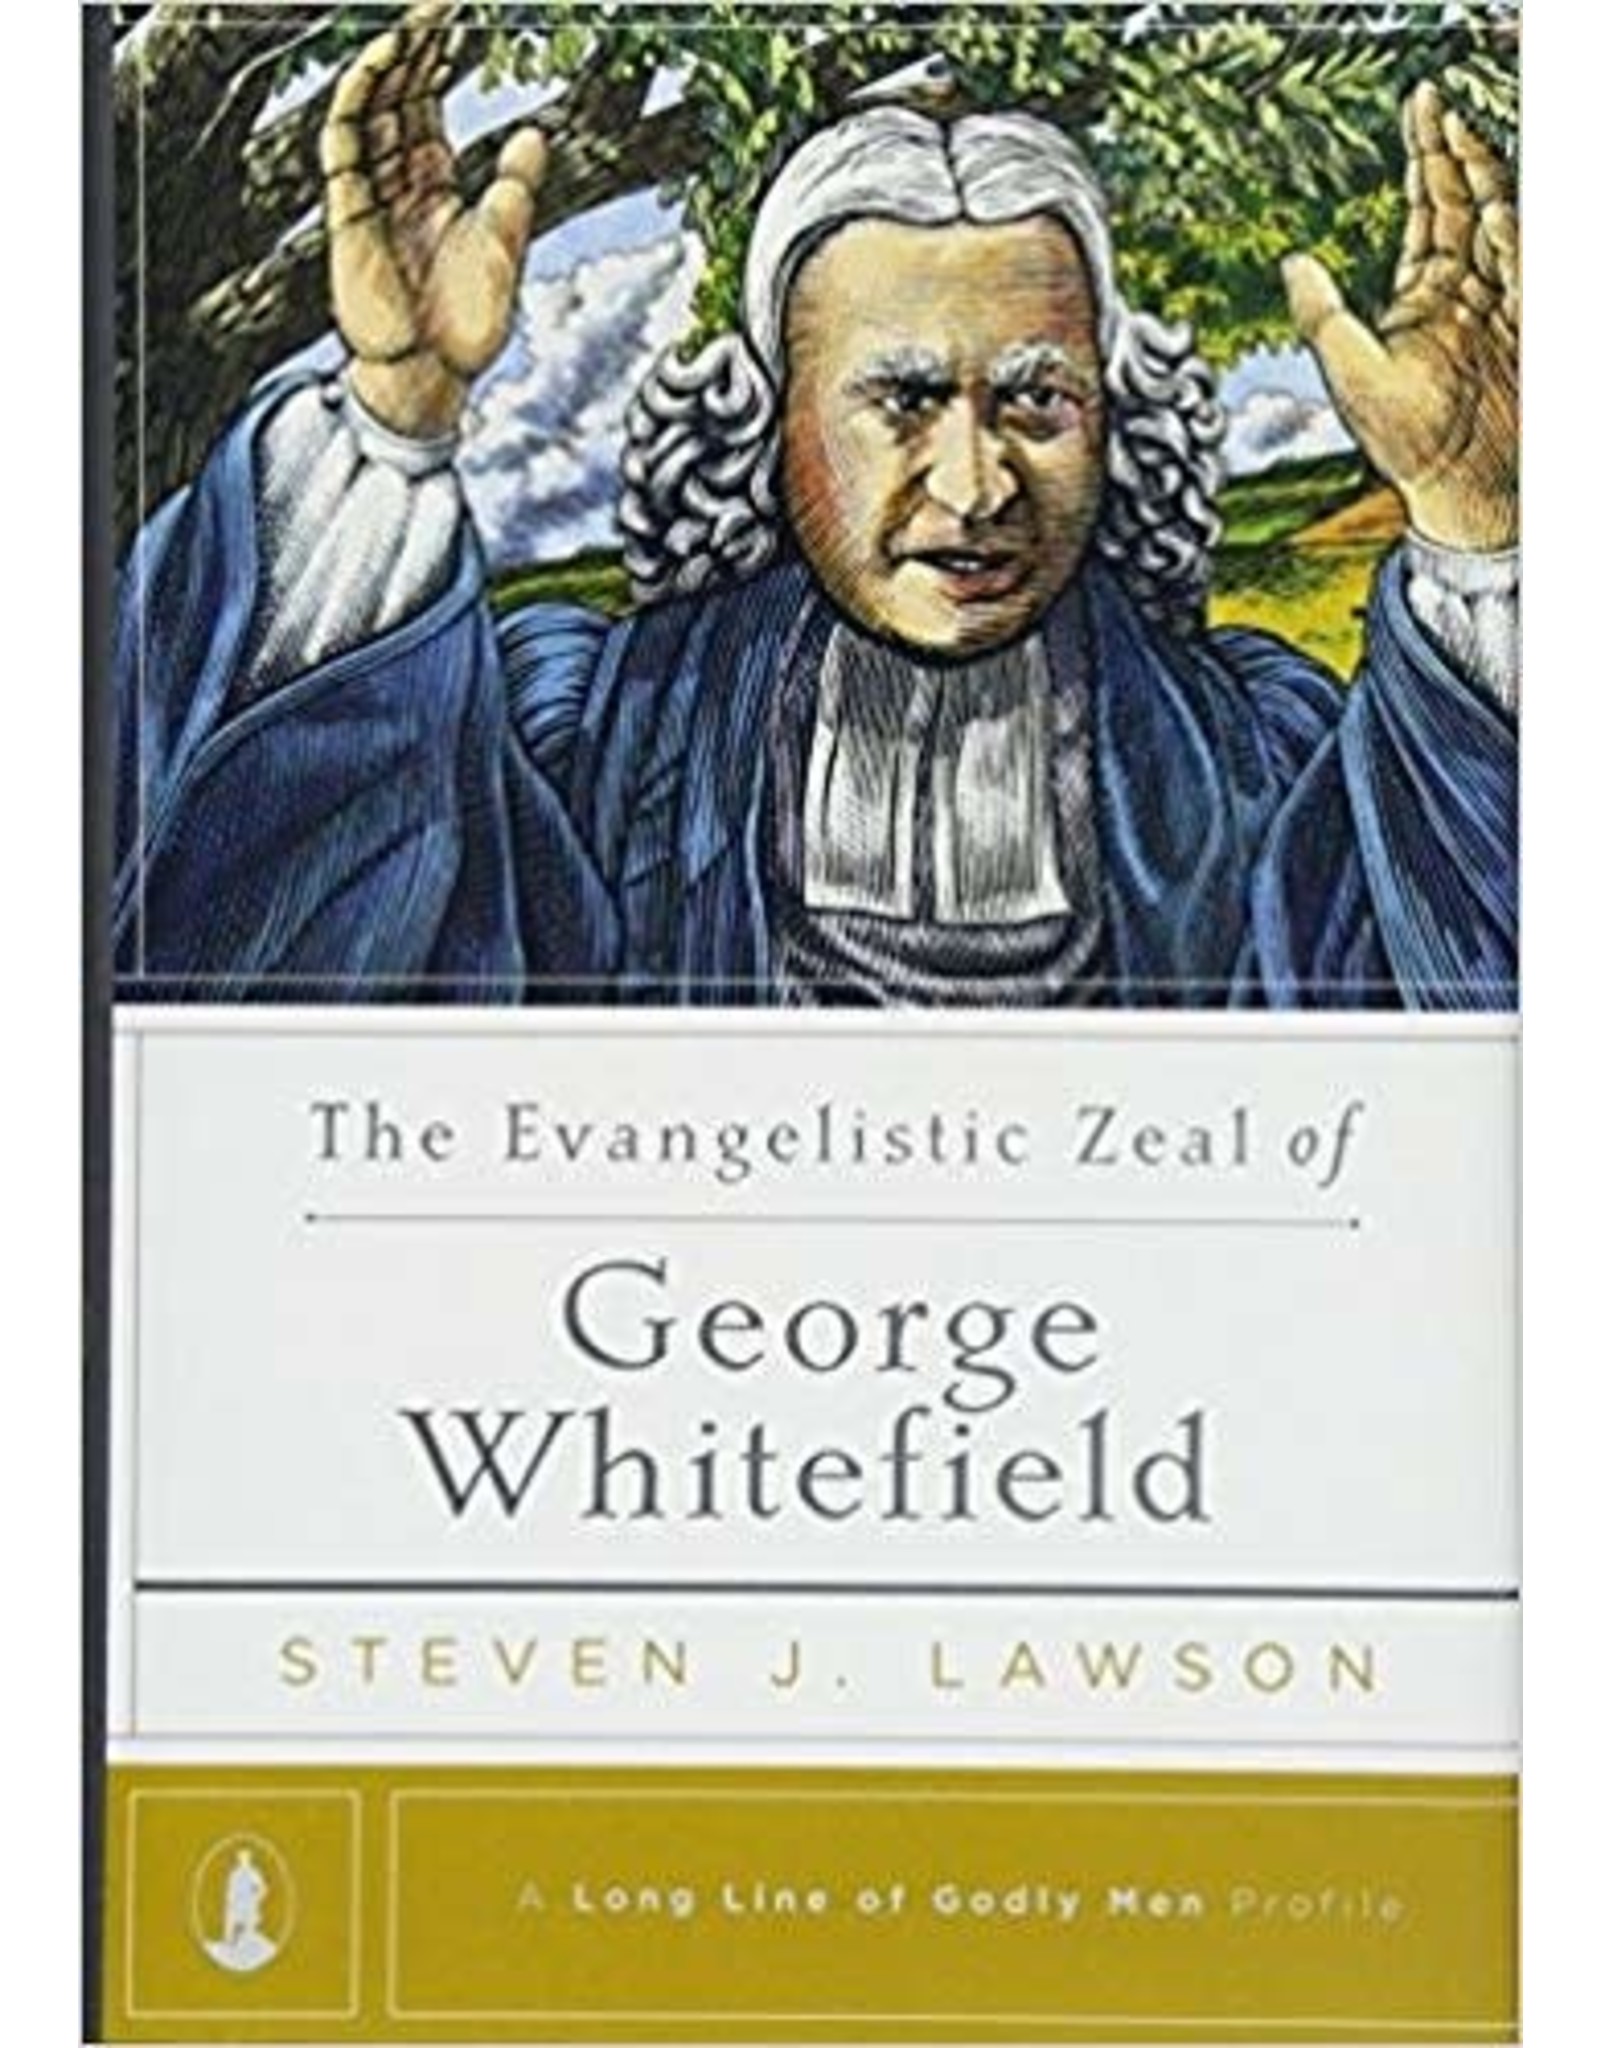 Steven J Lawson The Evangelistic Zeal of George Whitefield - A Long line of Godly Men